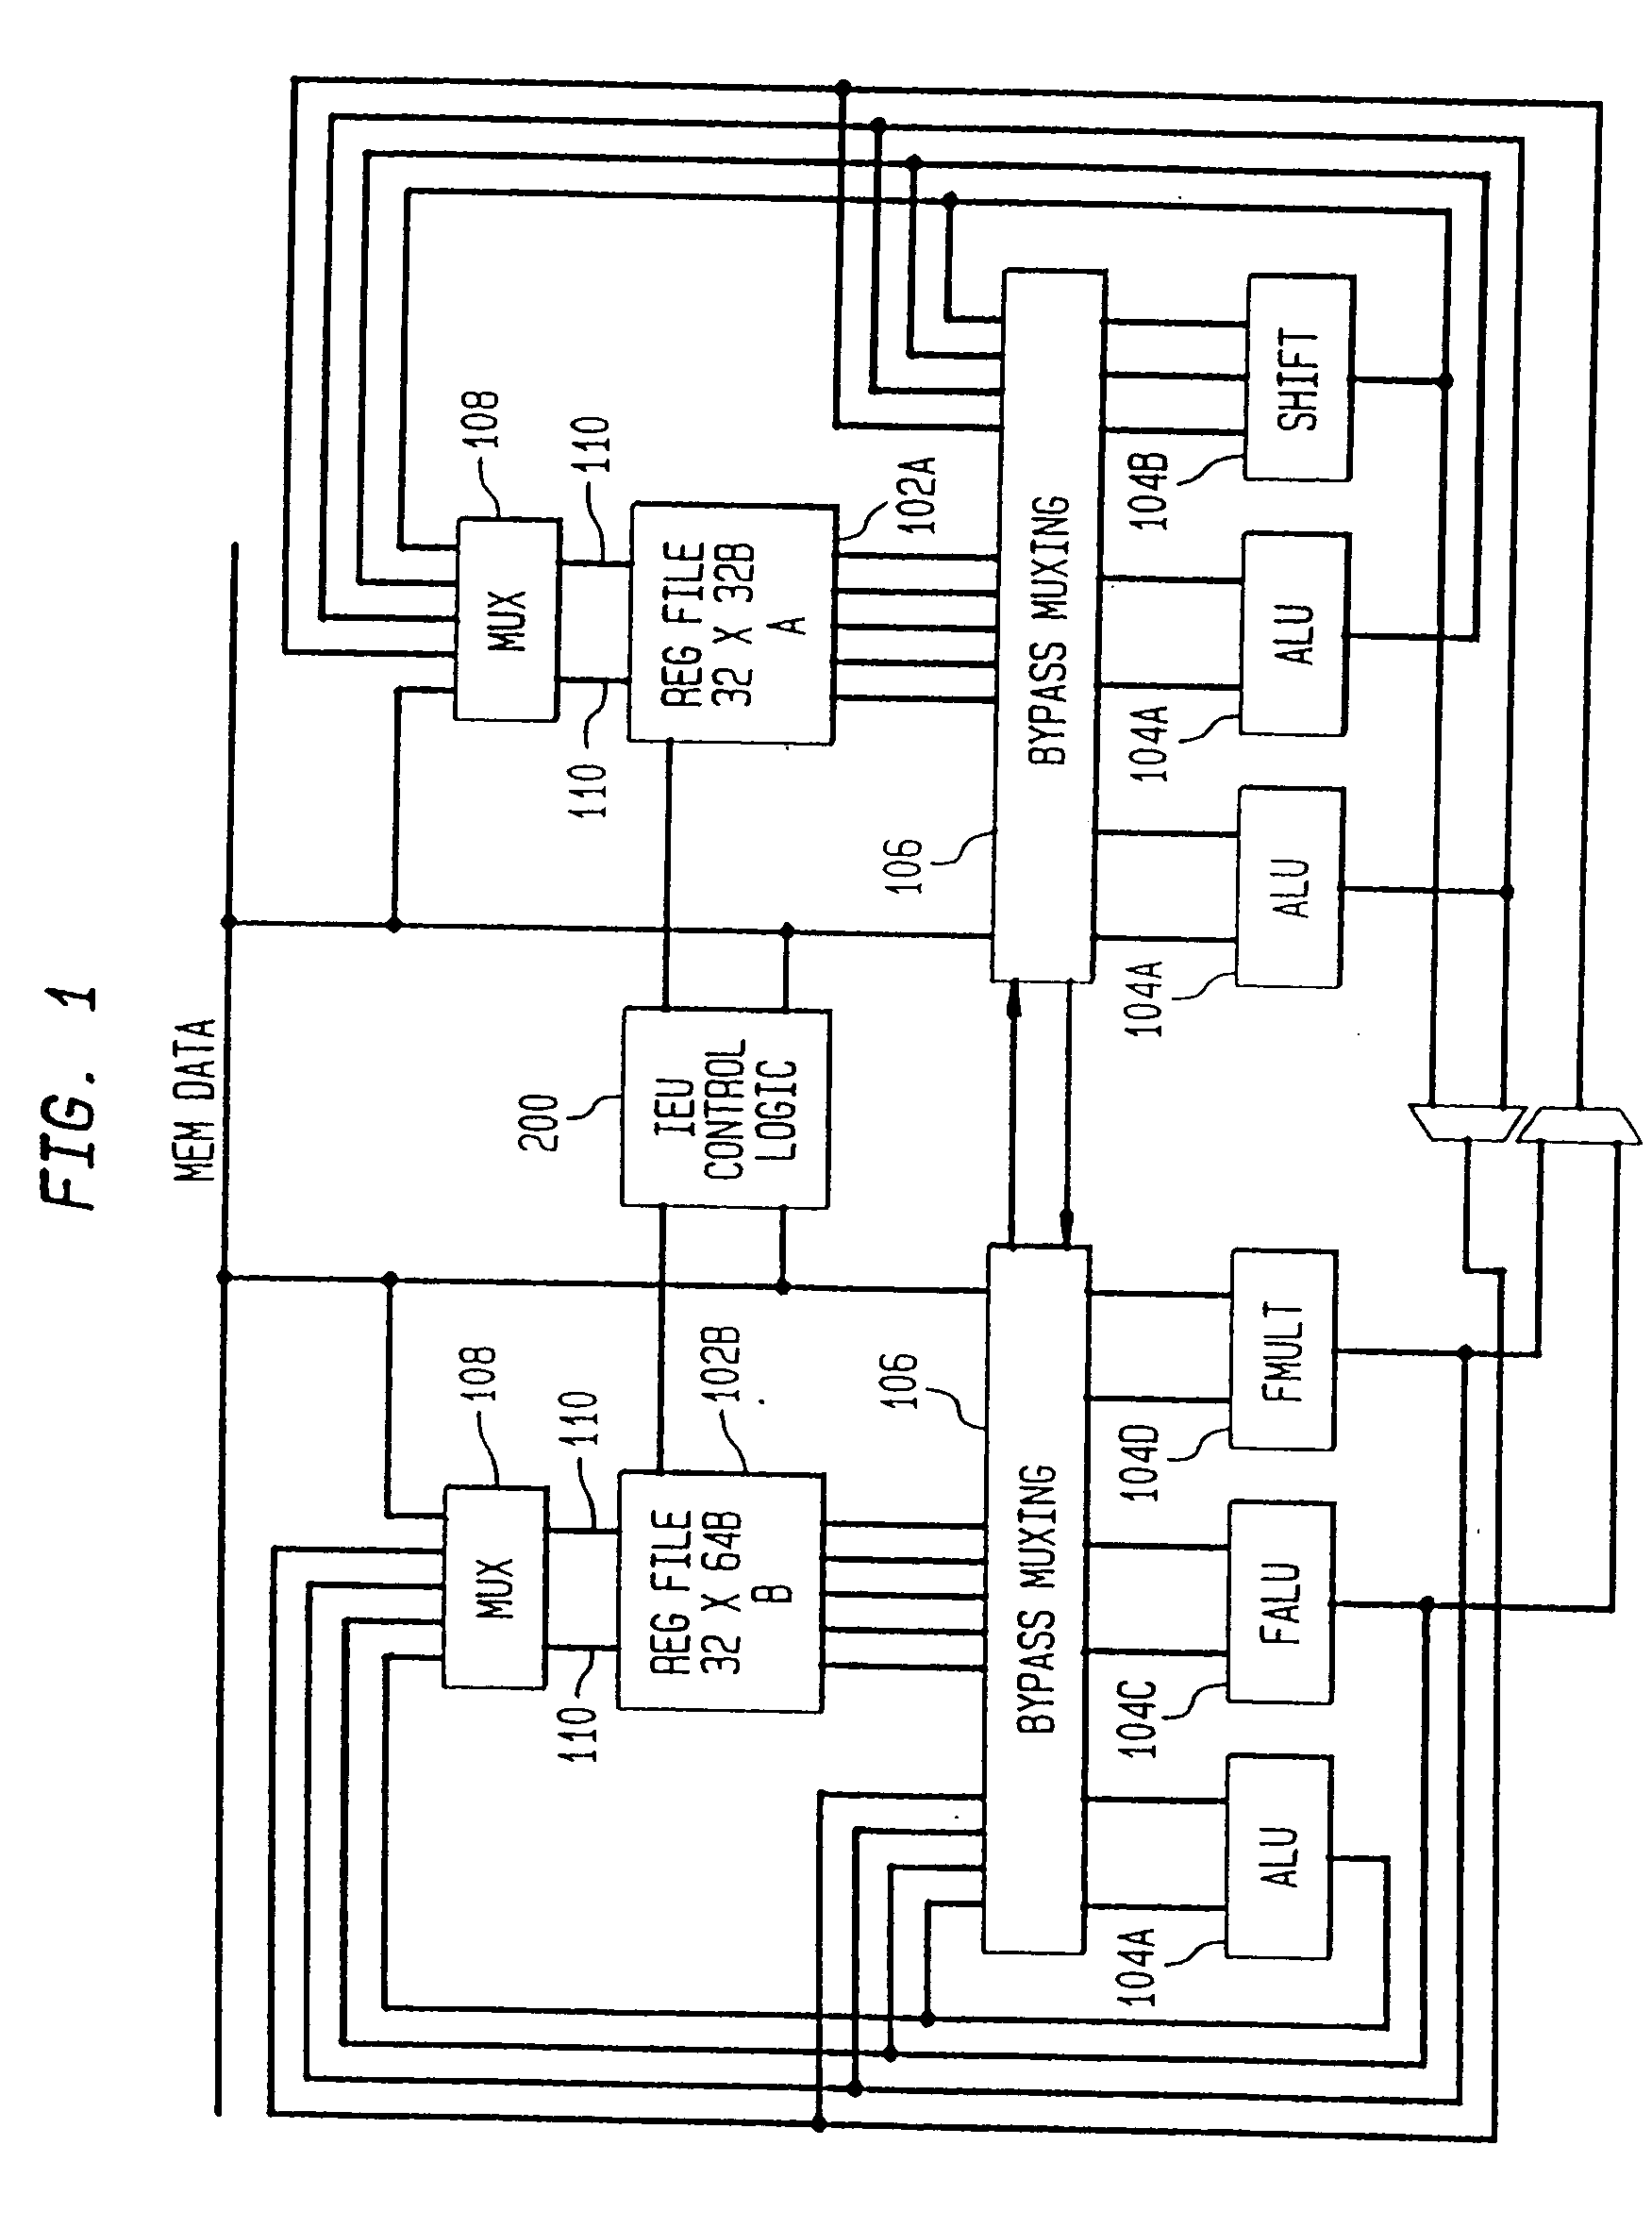 System and method for retiring approximately simultaneously a group of instructions in a superscalar microprocessor